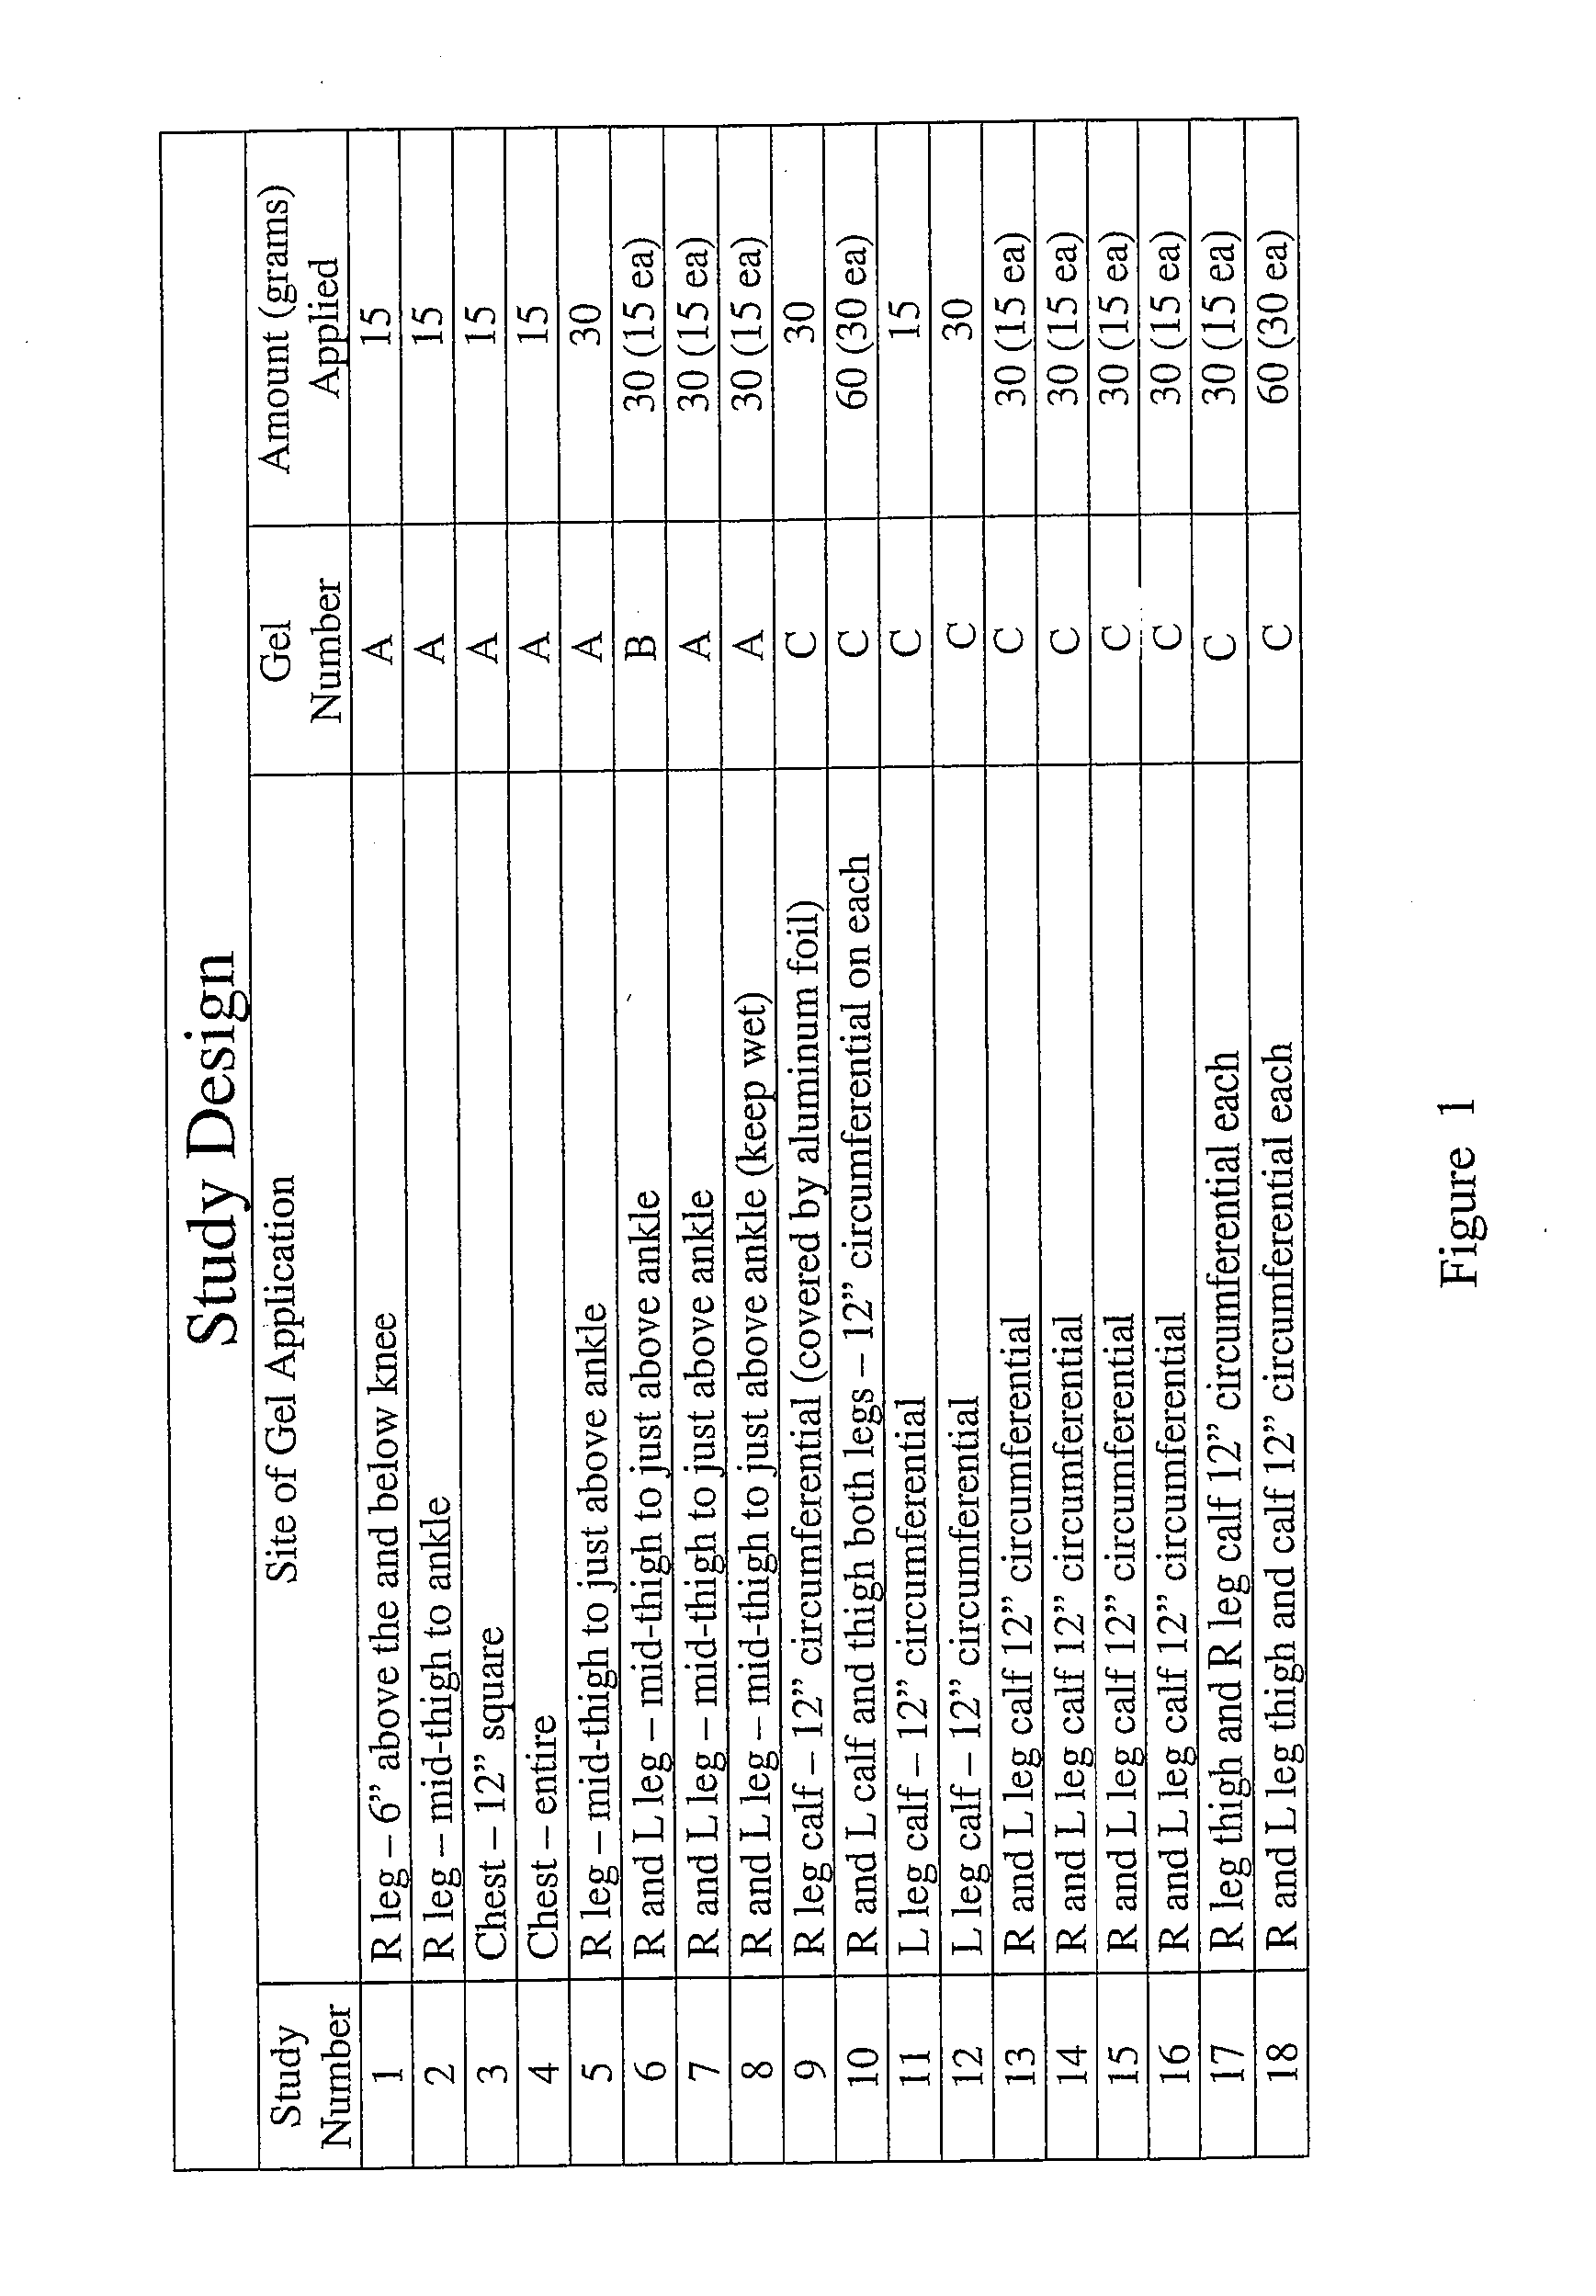 Deep topical systemic nitric oxide therapy apparatus and method